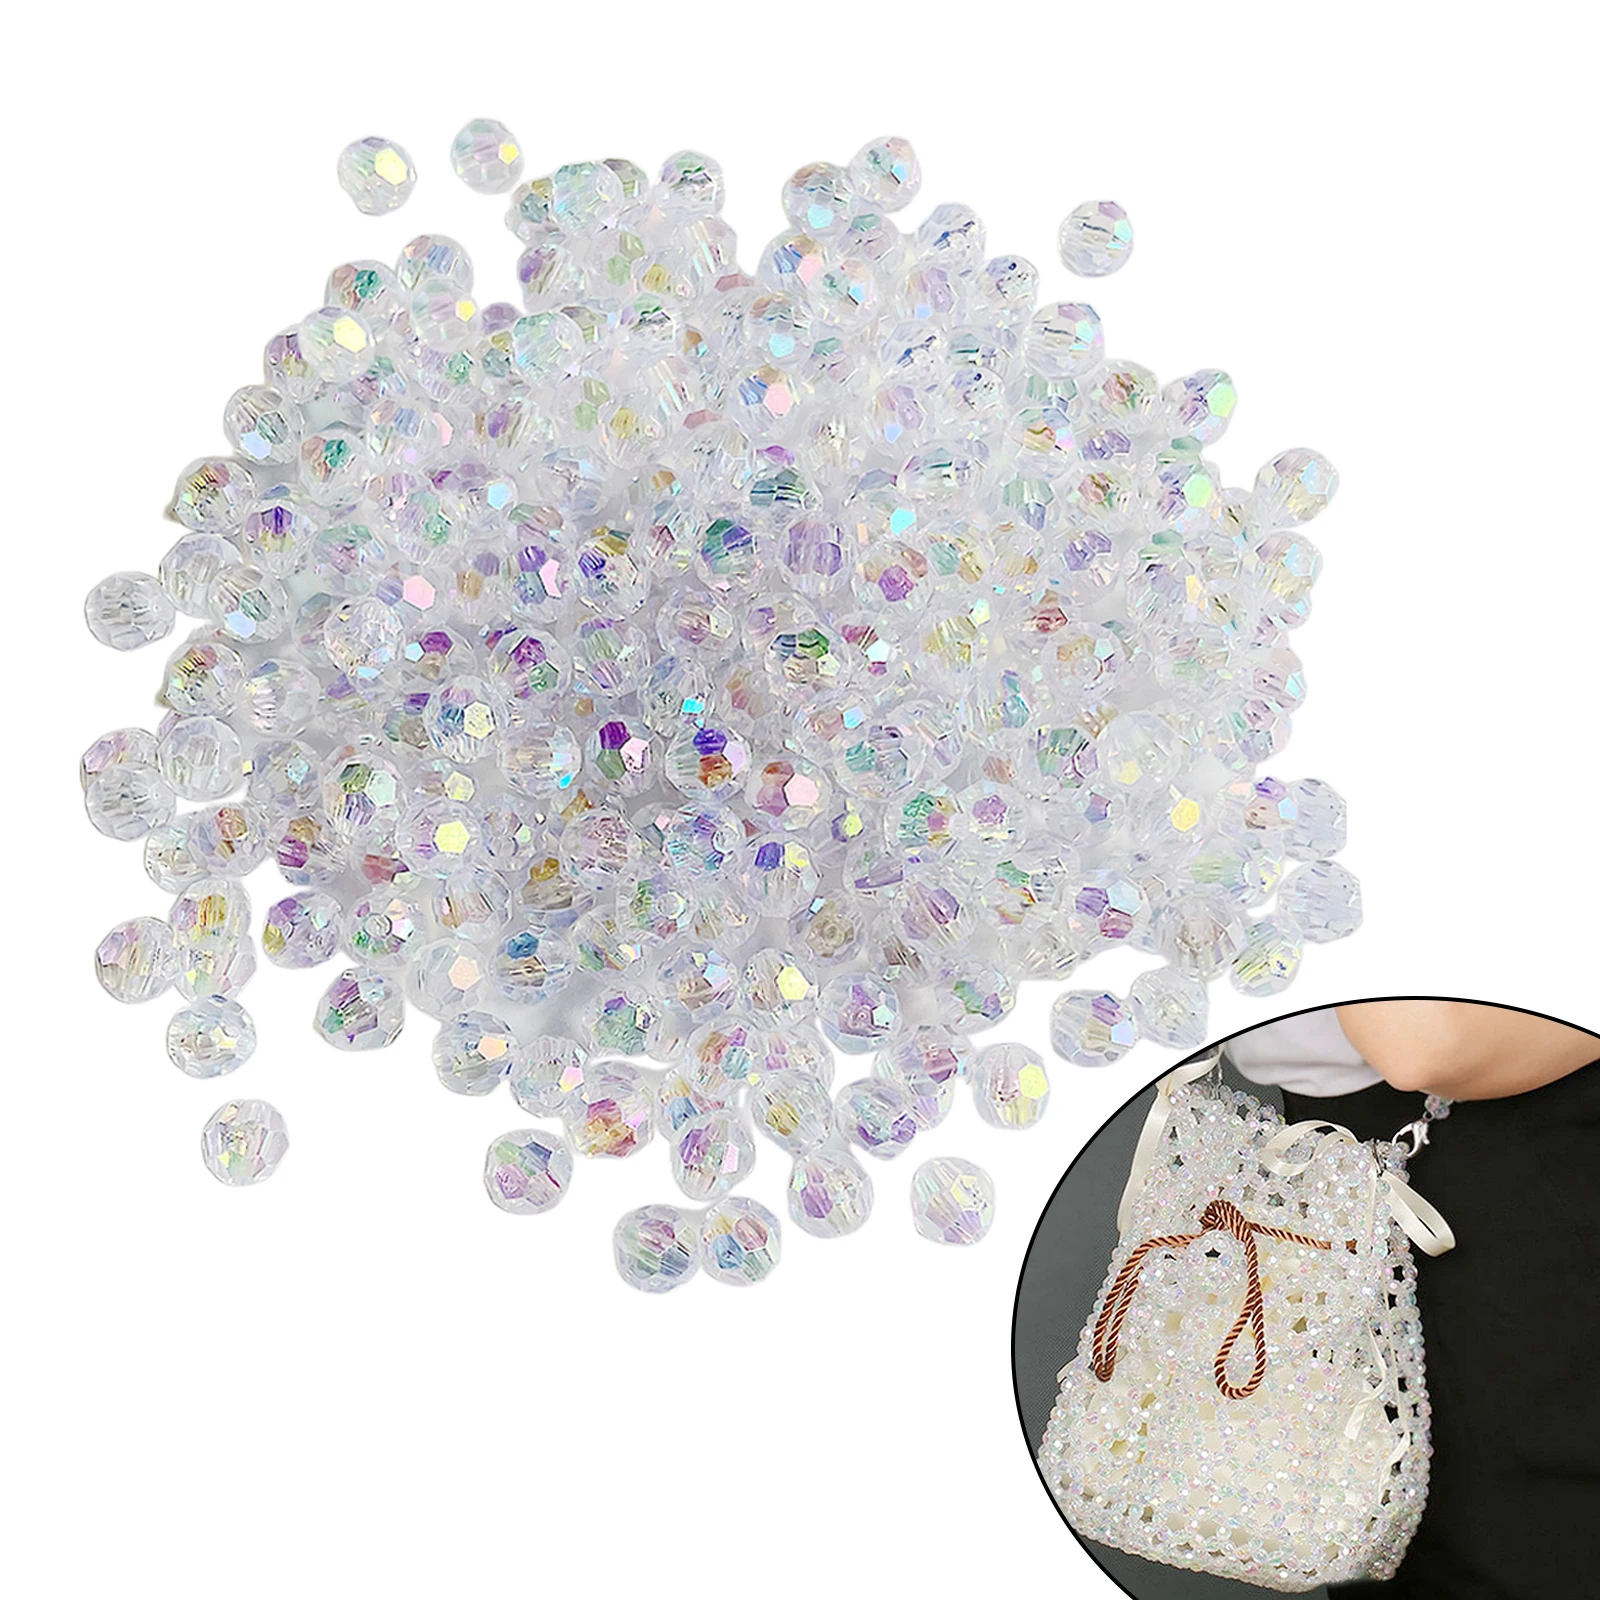 500x Clear Acrylic Beads AB Color Spacer Beads DIY Jewelry Beading Craft